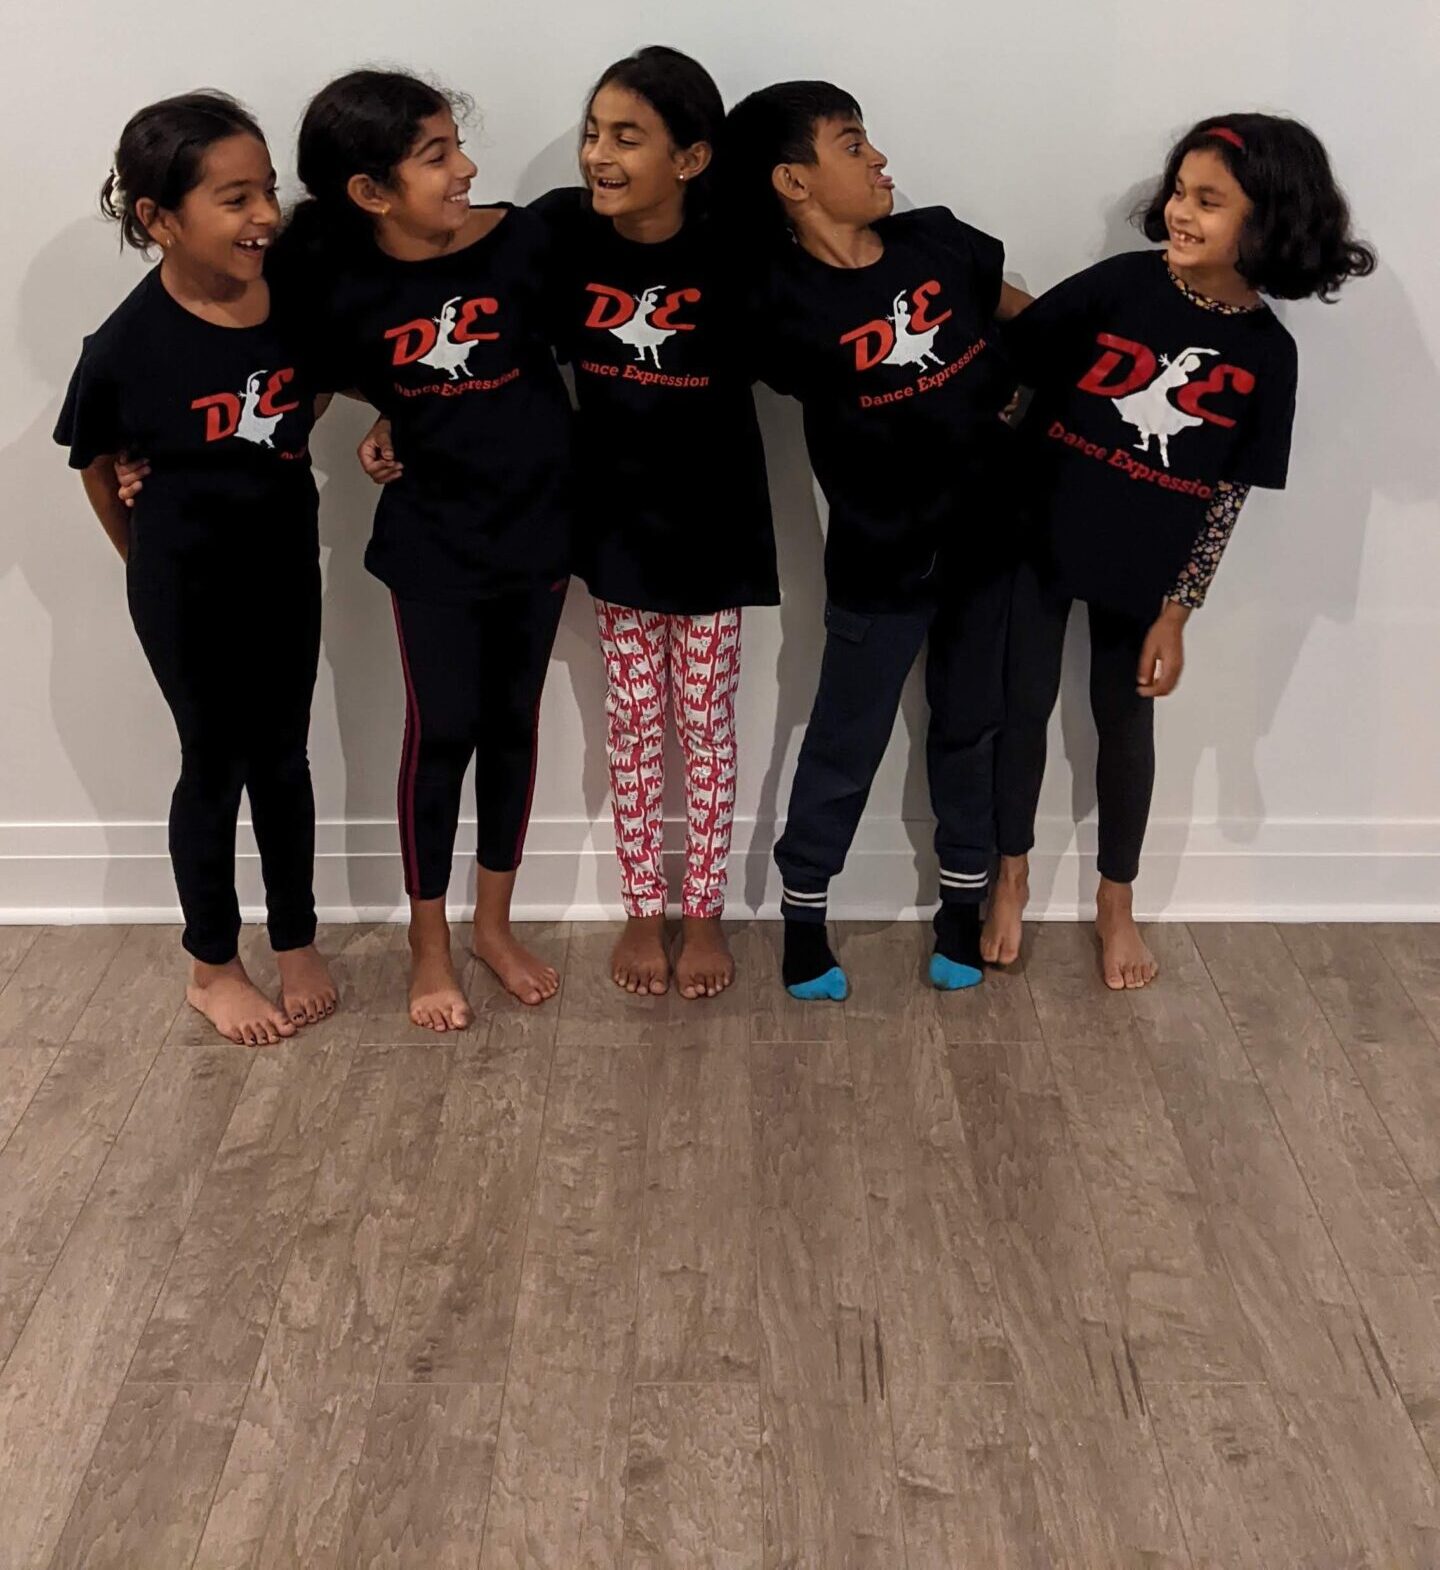 Five smiling children wearing black Dance Expression t-shirts standing in a row, looking at each other and sharing a joyful moment together, possibly after a dance class at the Dance Expression studio. They are barefoot, indicating a casual and comfortable environment conducive to dance practice.